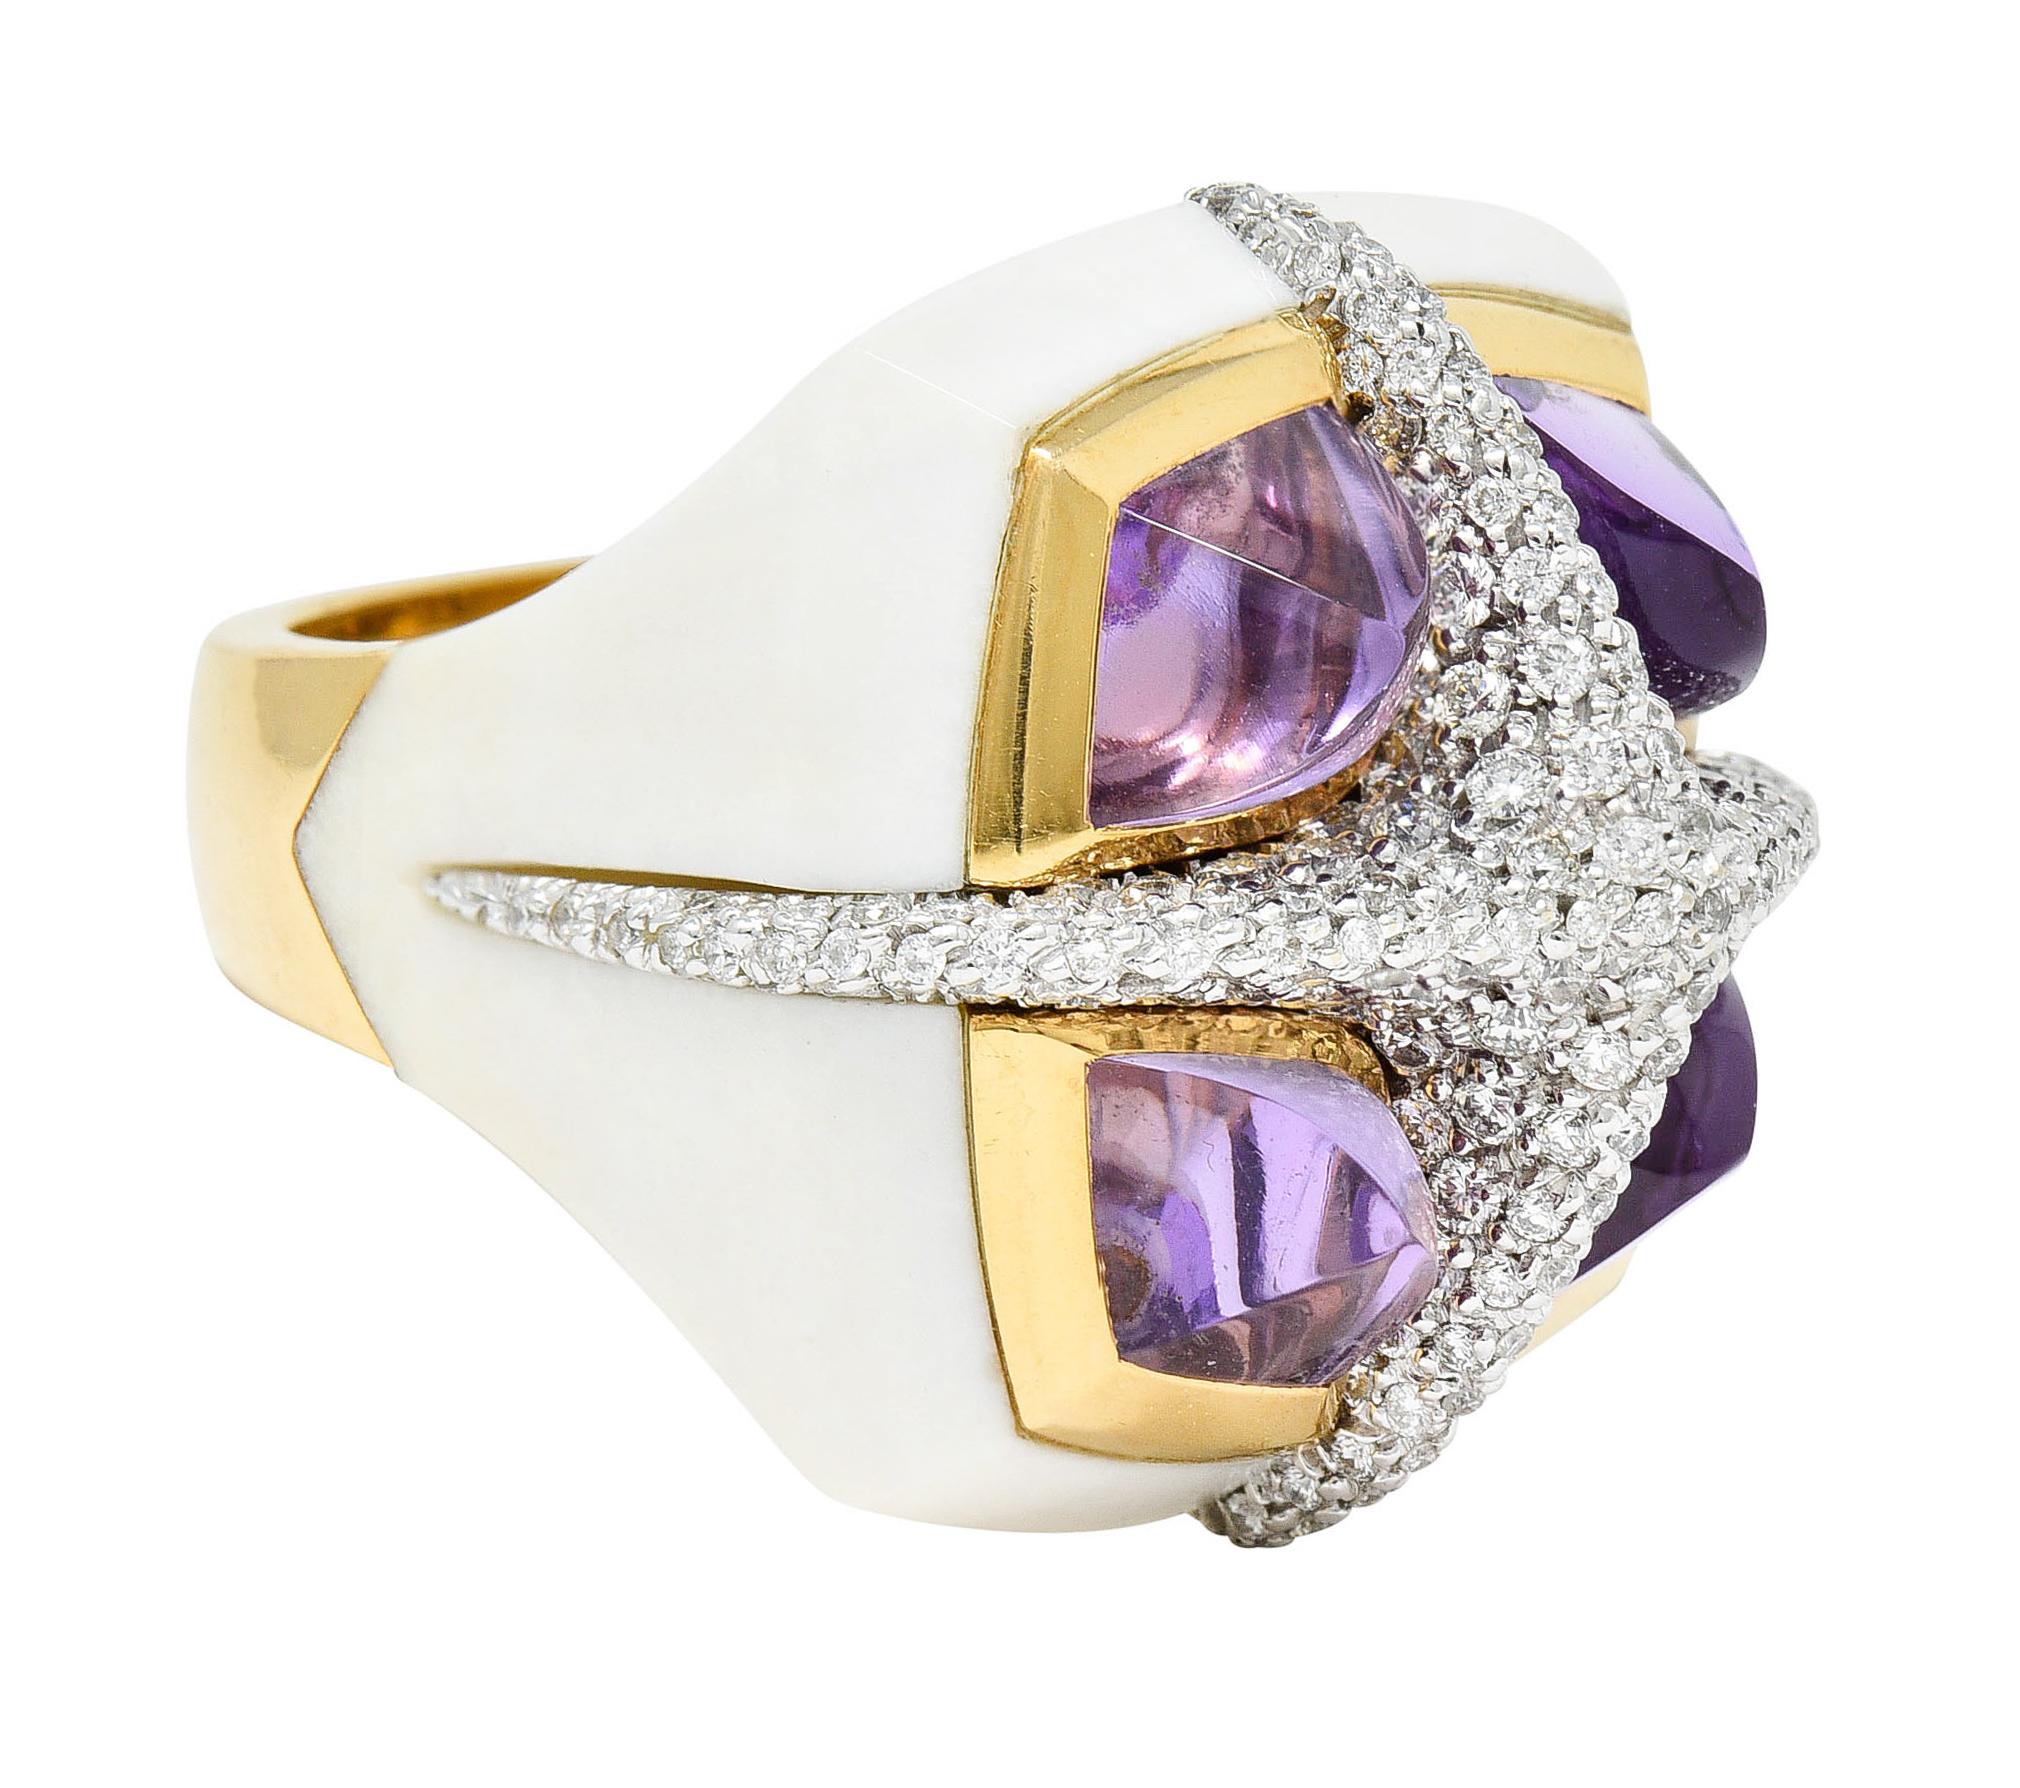 Substantial ring features a pavè diamond pyramidal X form

Round brilliant cut diamonds weigh in total approximately 2.25 carats - G/H color with SI clarity

Each quadrant features a sugarloaf cabochon of amethyst - well matched in light pinkish